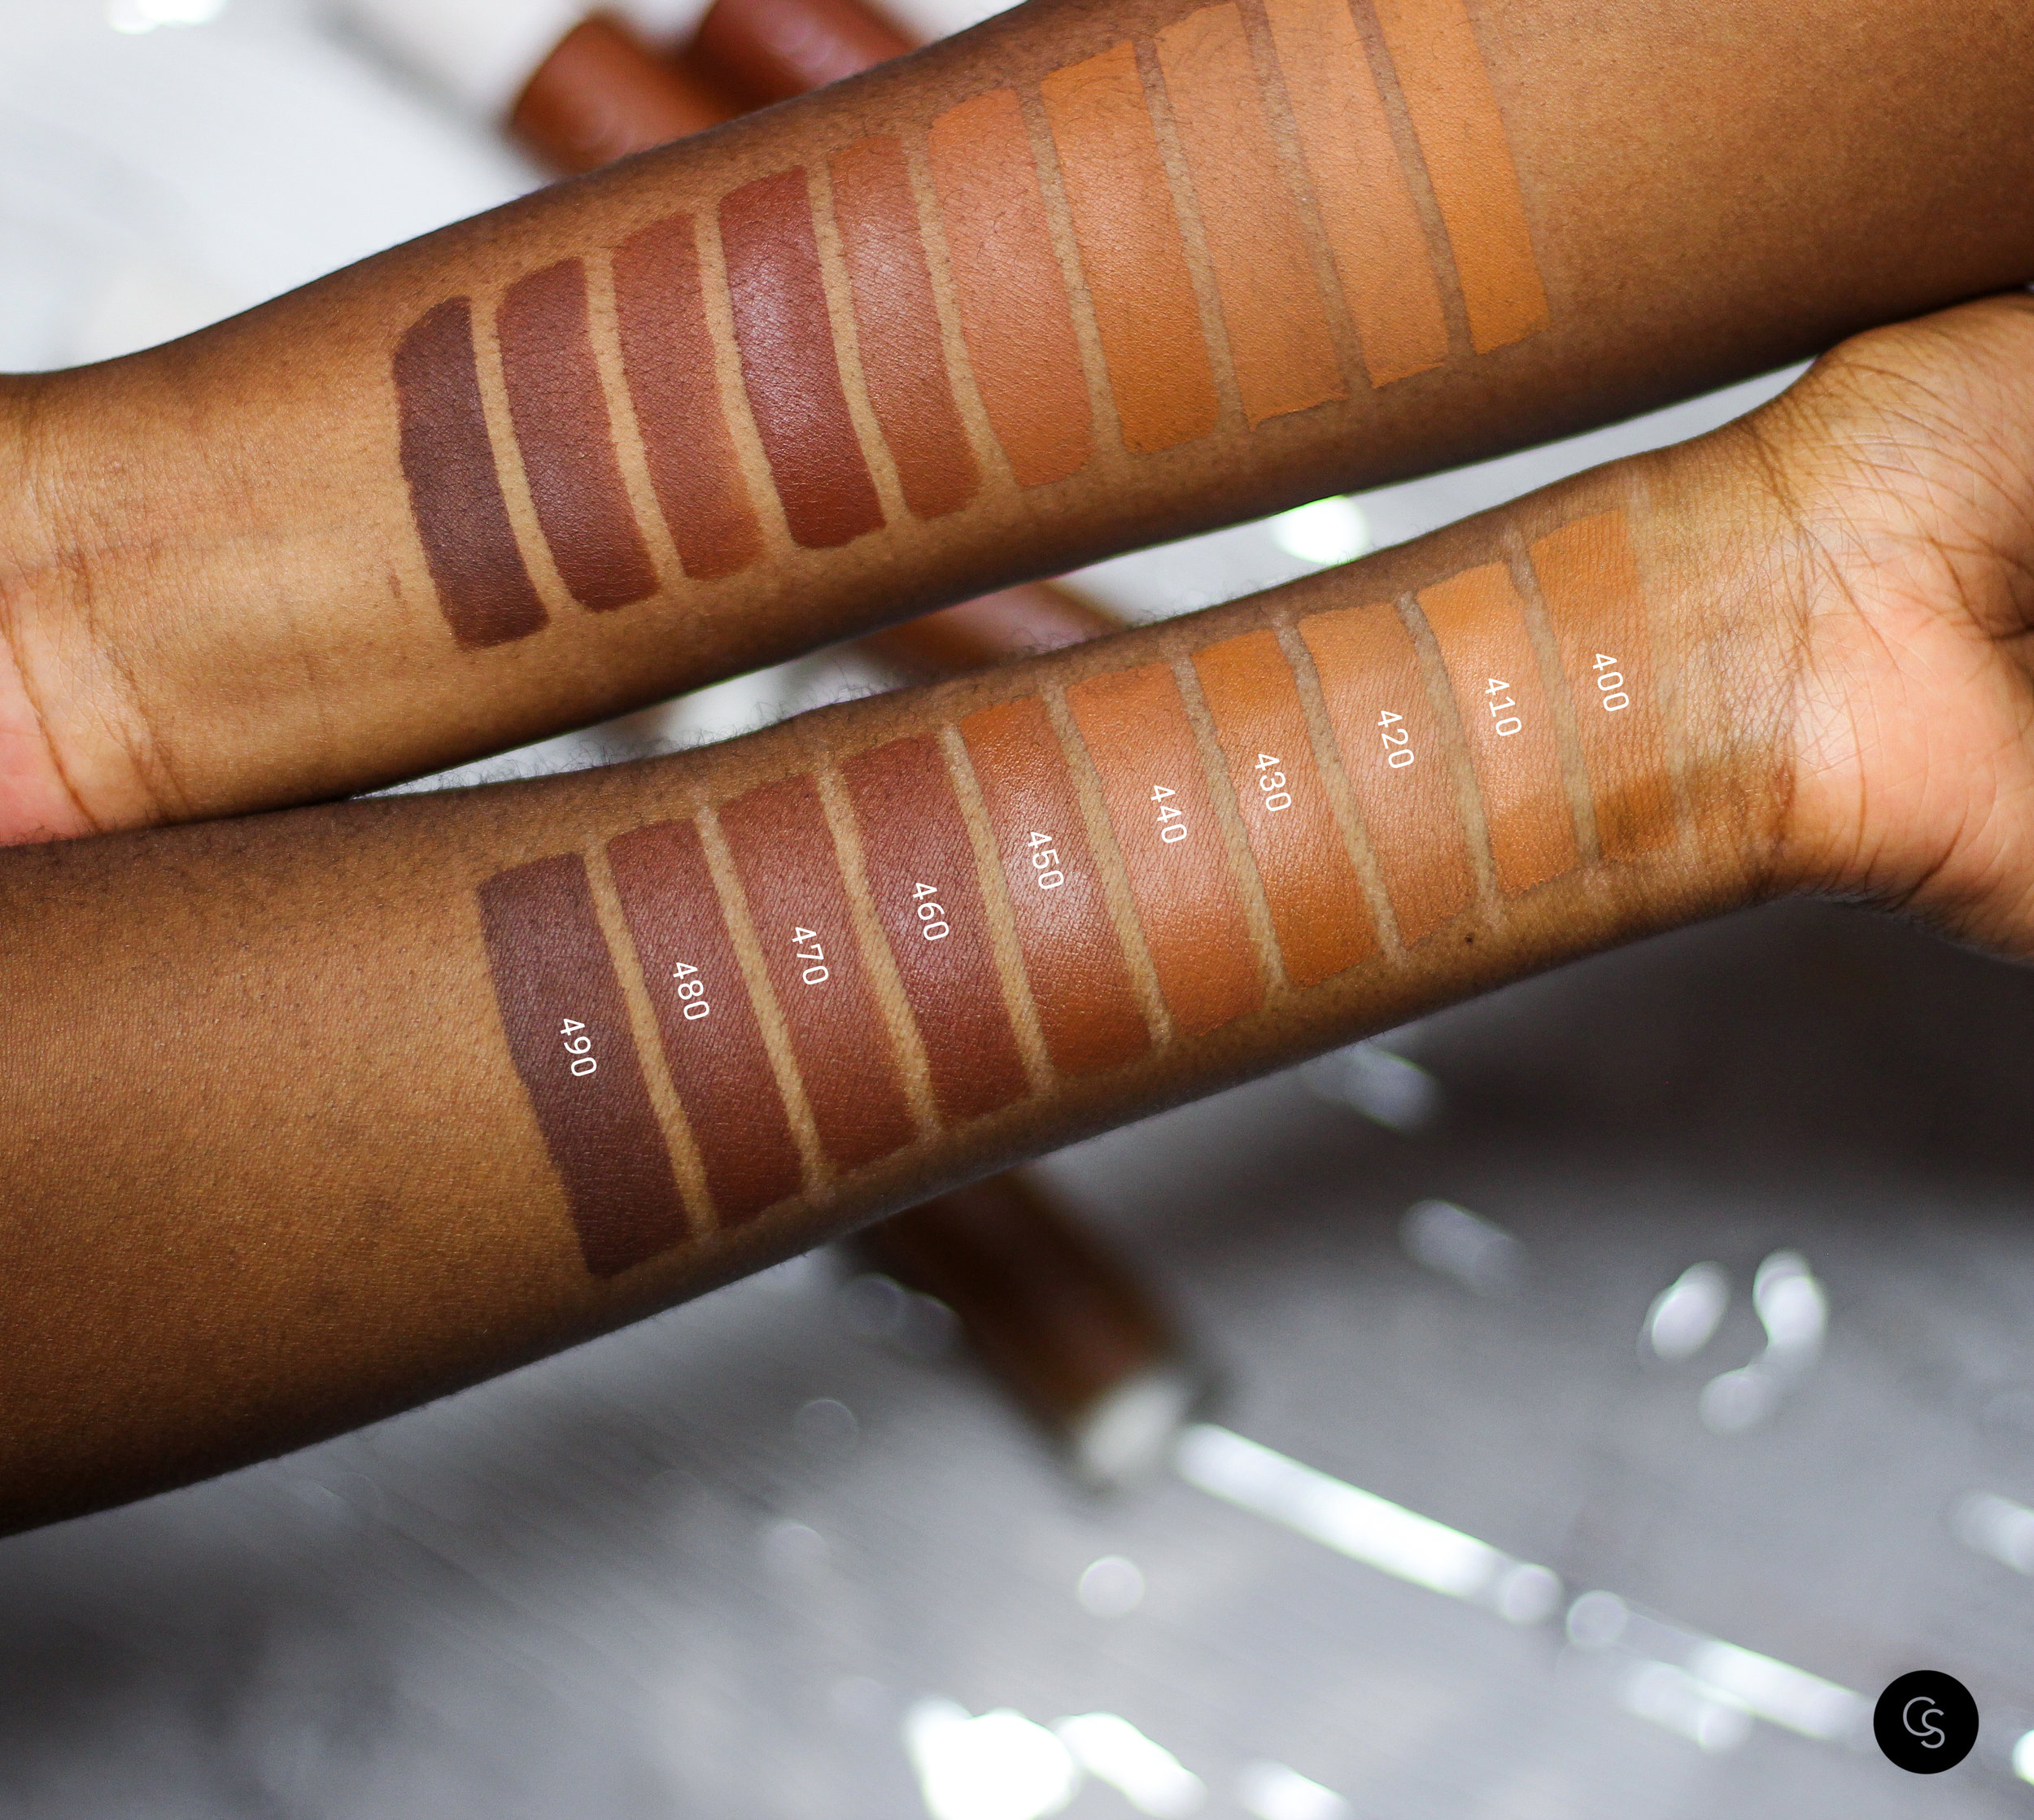 Pro Filt'r - Fenty Beauty Foundation — Cocoa Swatches